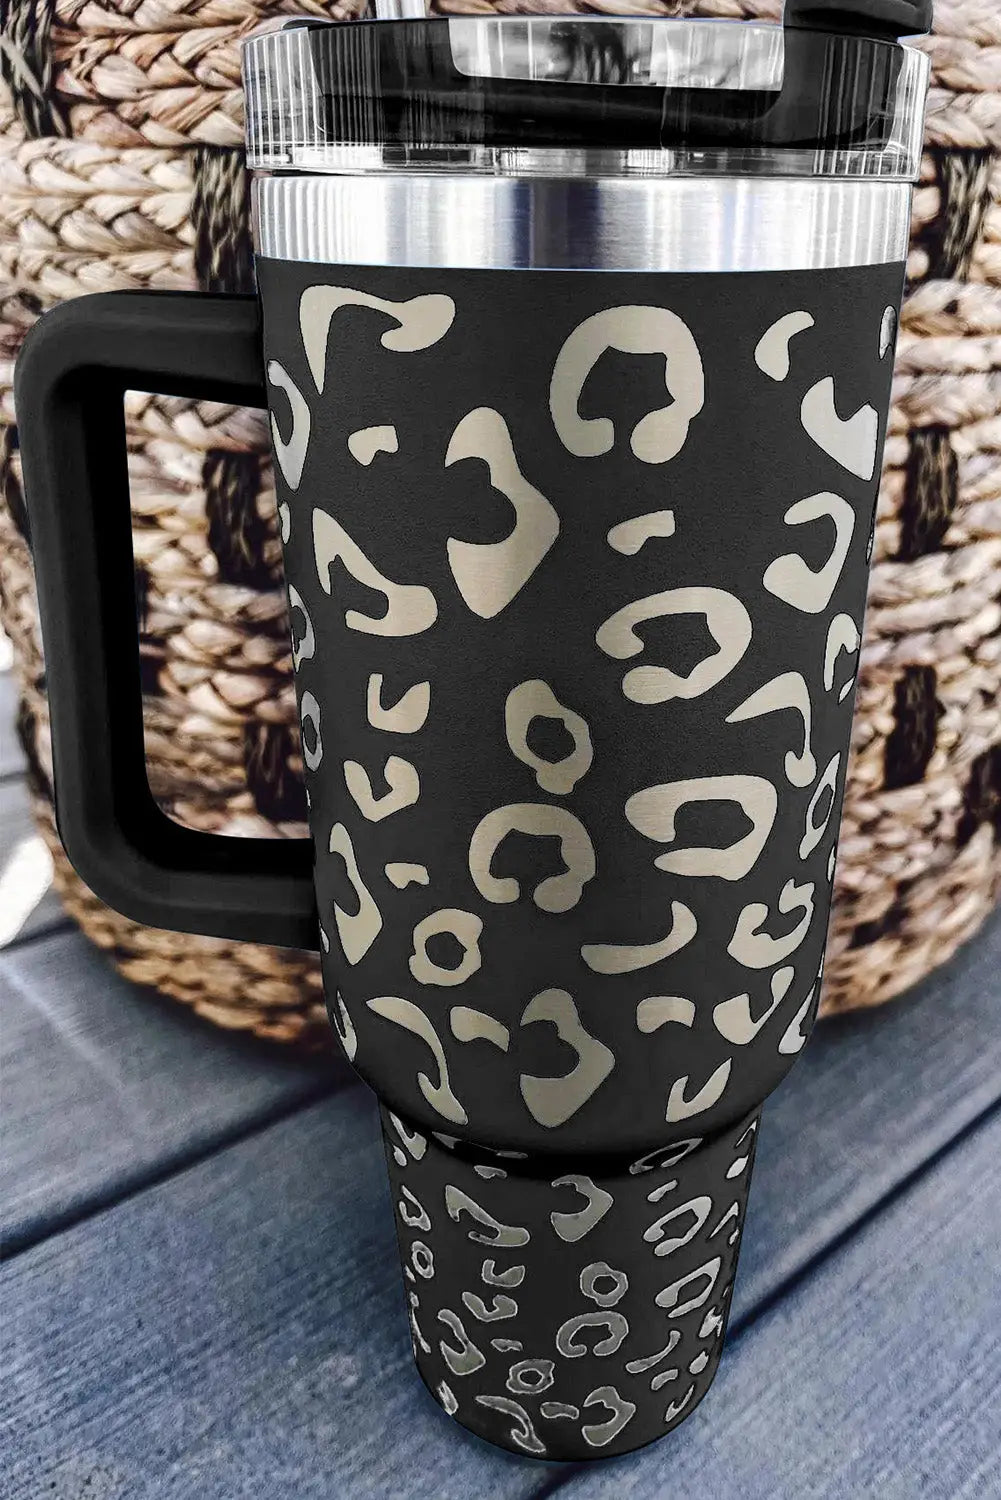 Black leopard spotted 304 stainless double insulated cup 40oz - one size / stainless steel - tumblers